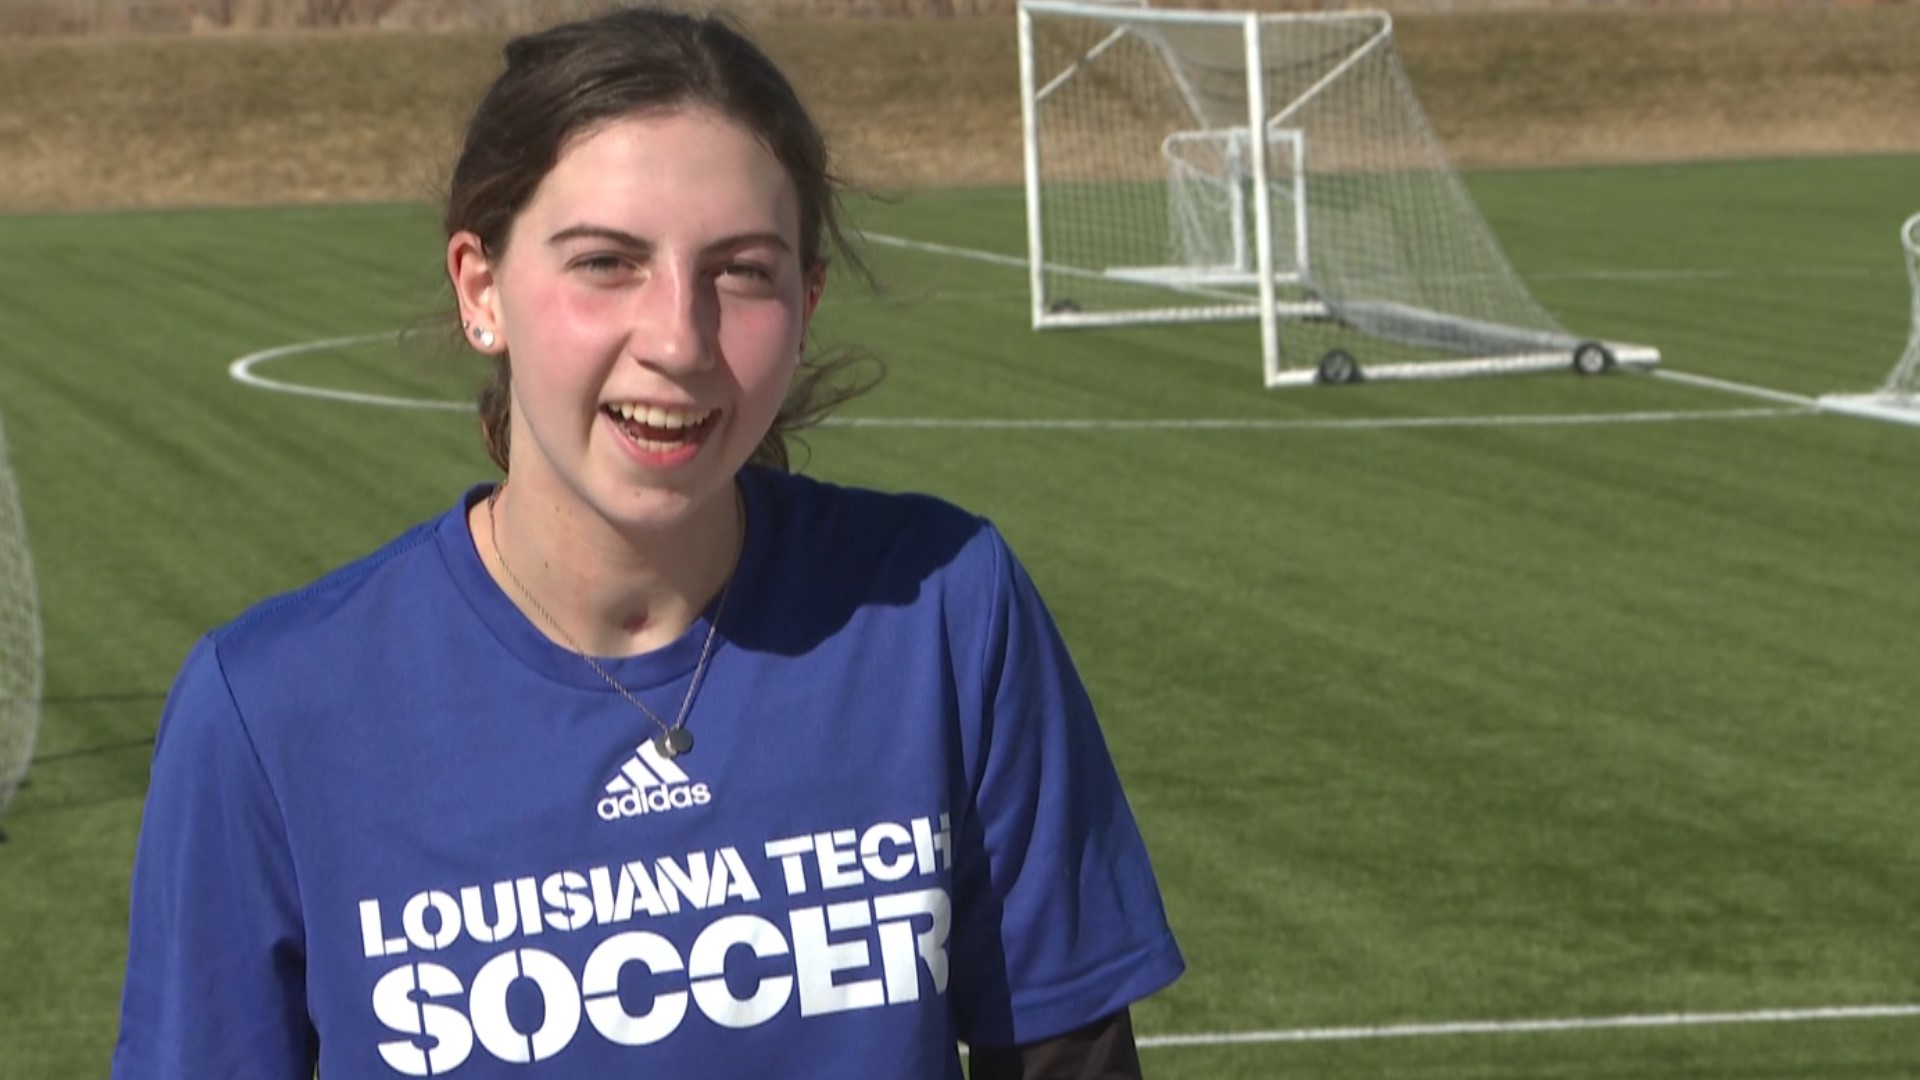 Mackenzie Kelso is returning to her team at Louisiana Tech only seven months after suffering cardiac arrest on the field.